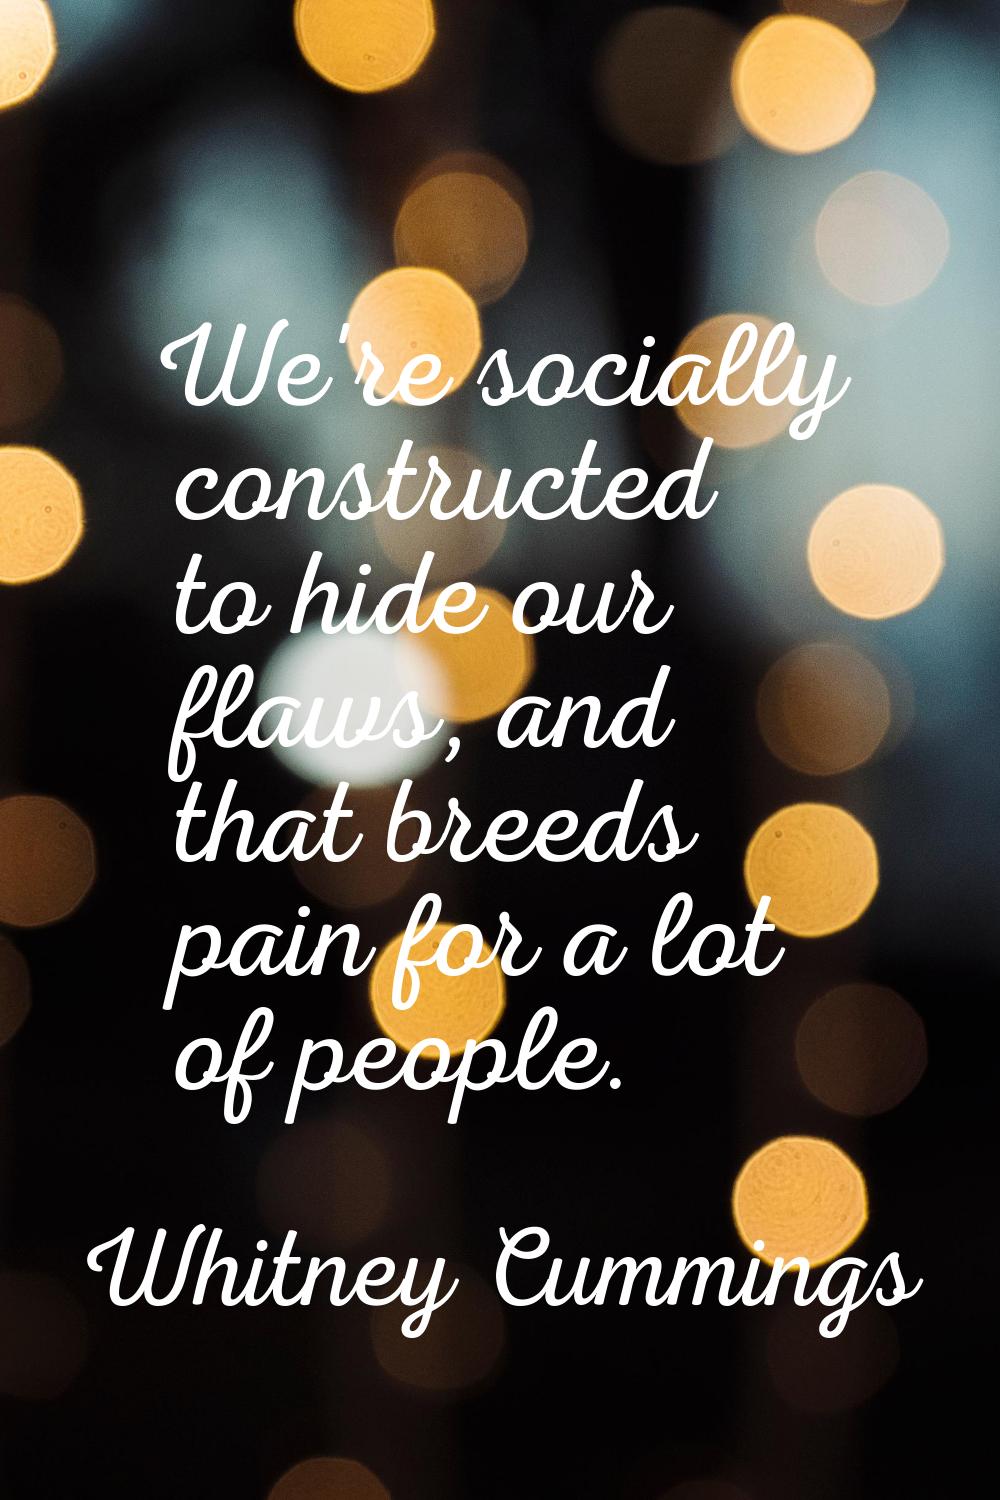 We're socially constructed to hide our flaws, and that breeds pain for a lot of people.